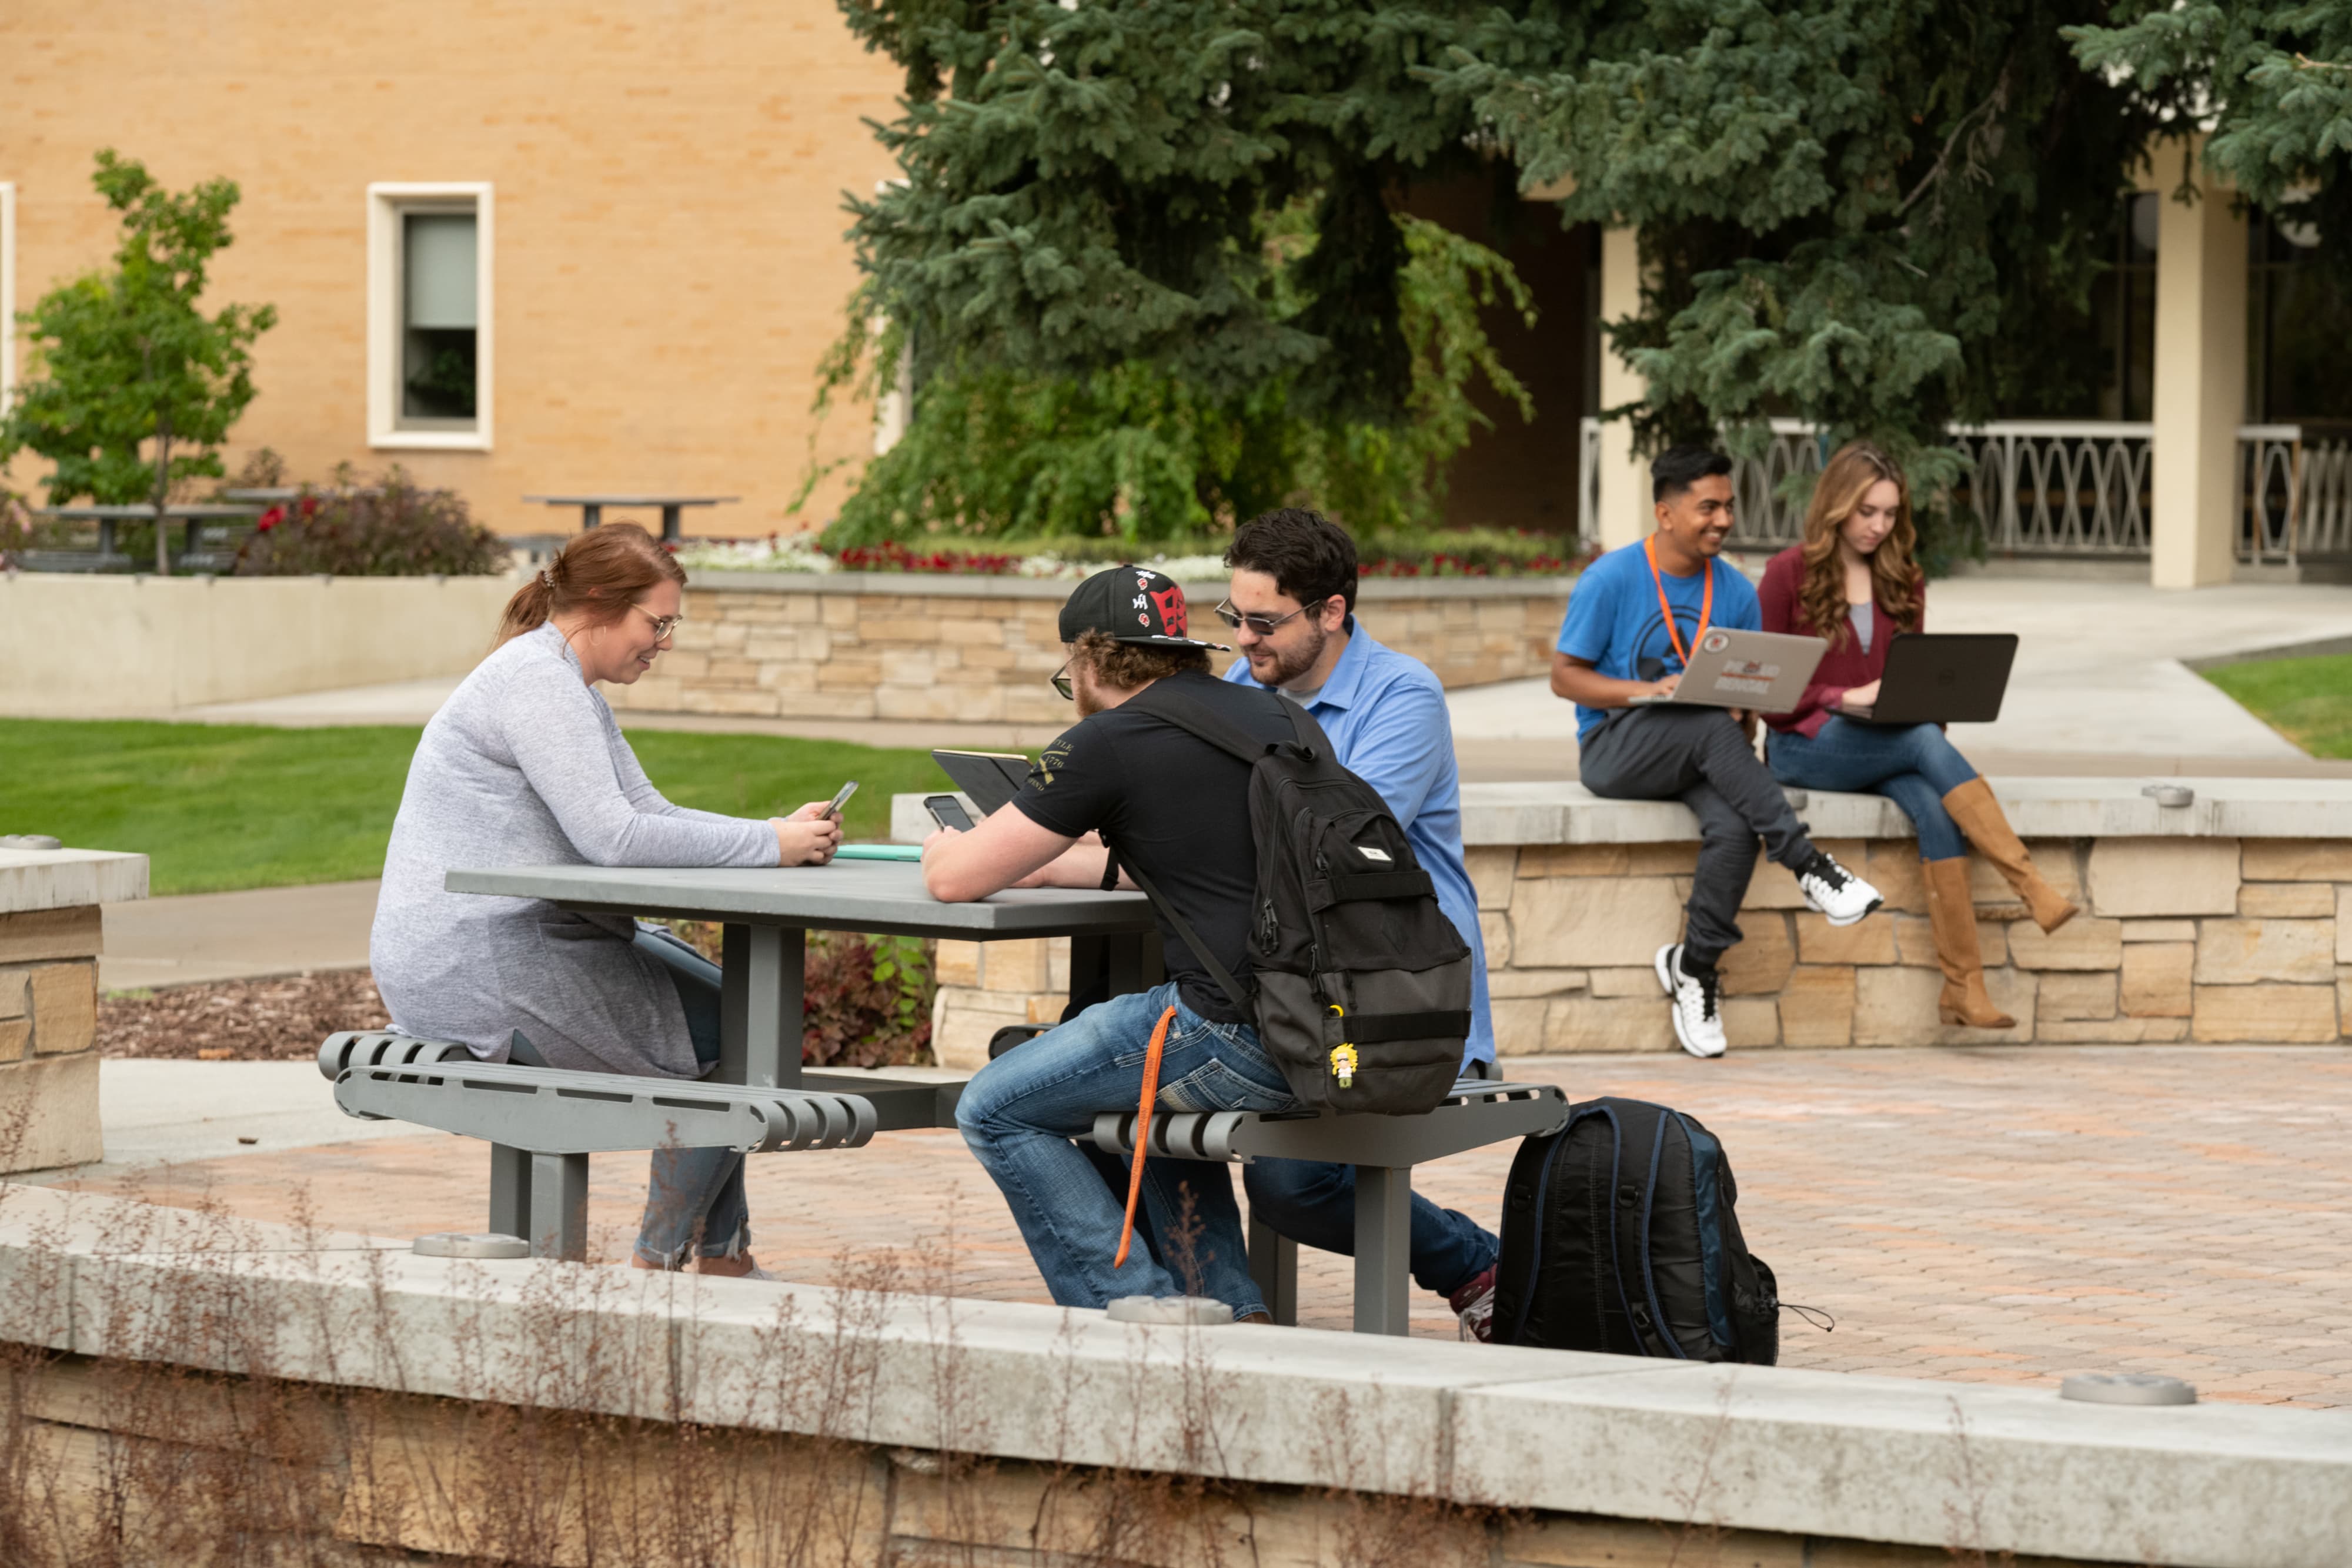 Two groups of students in an outdoor common area using technology.